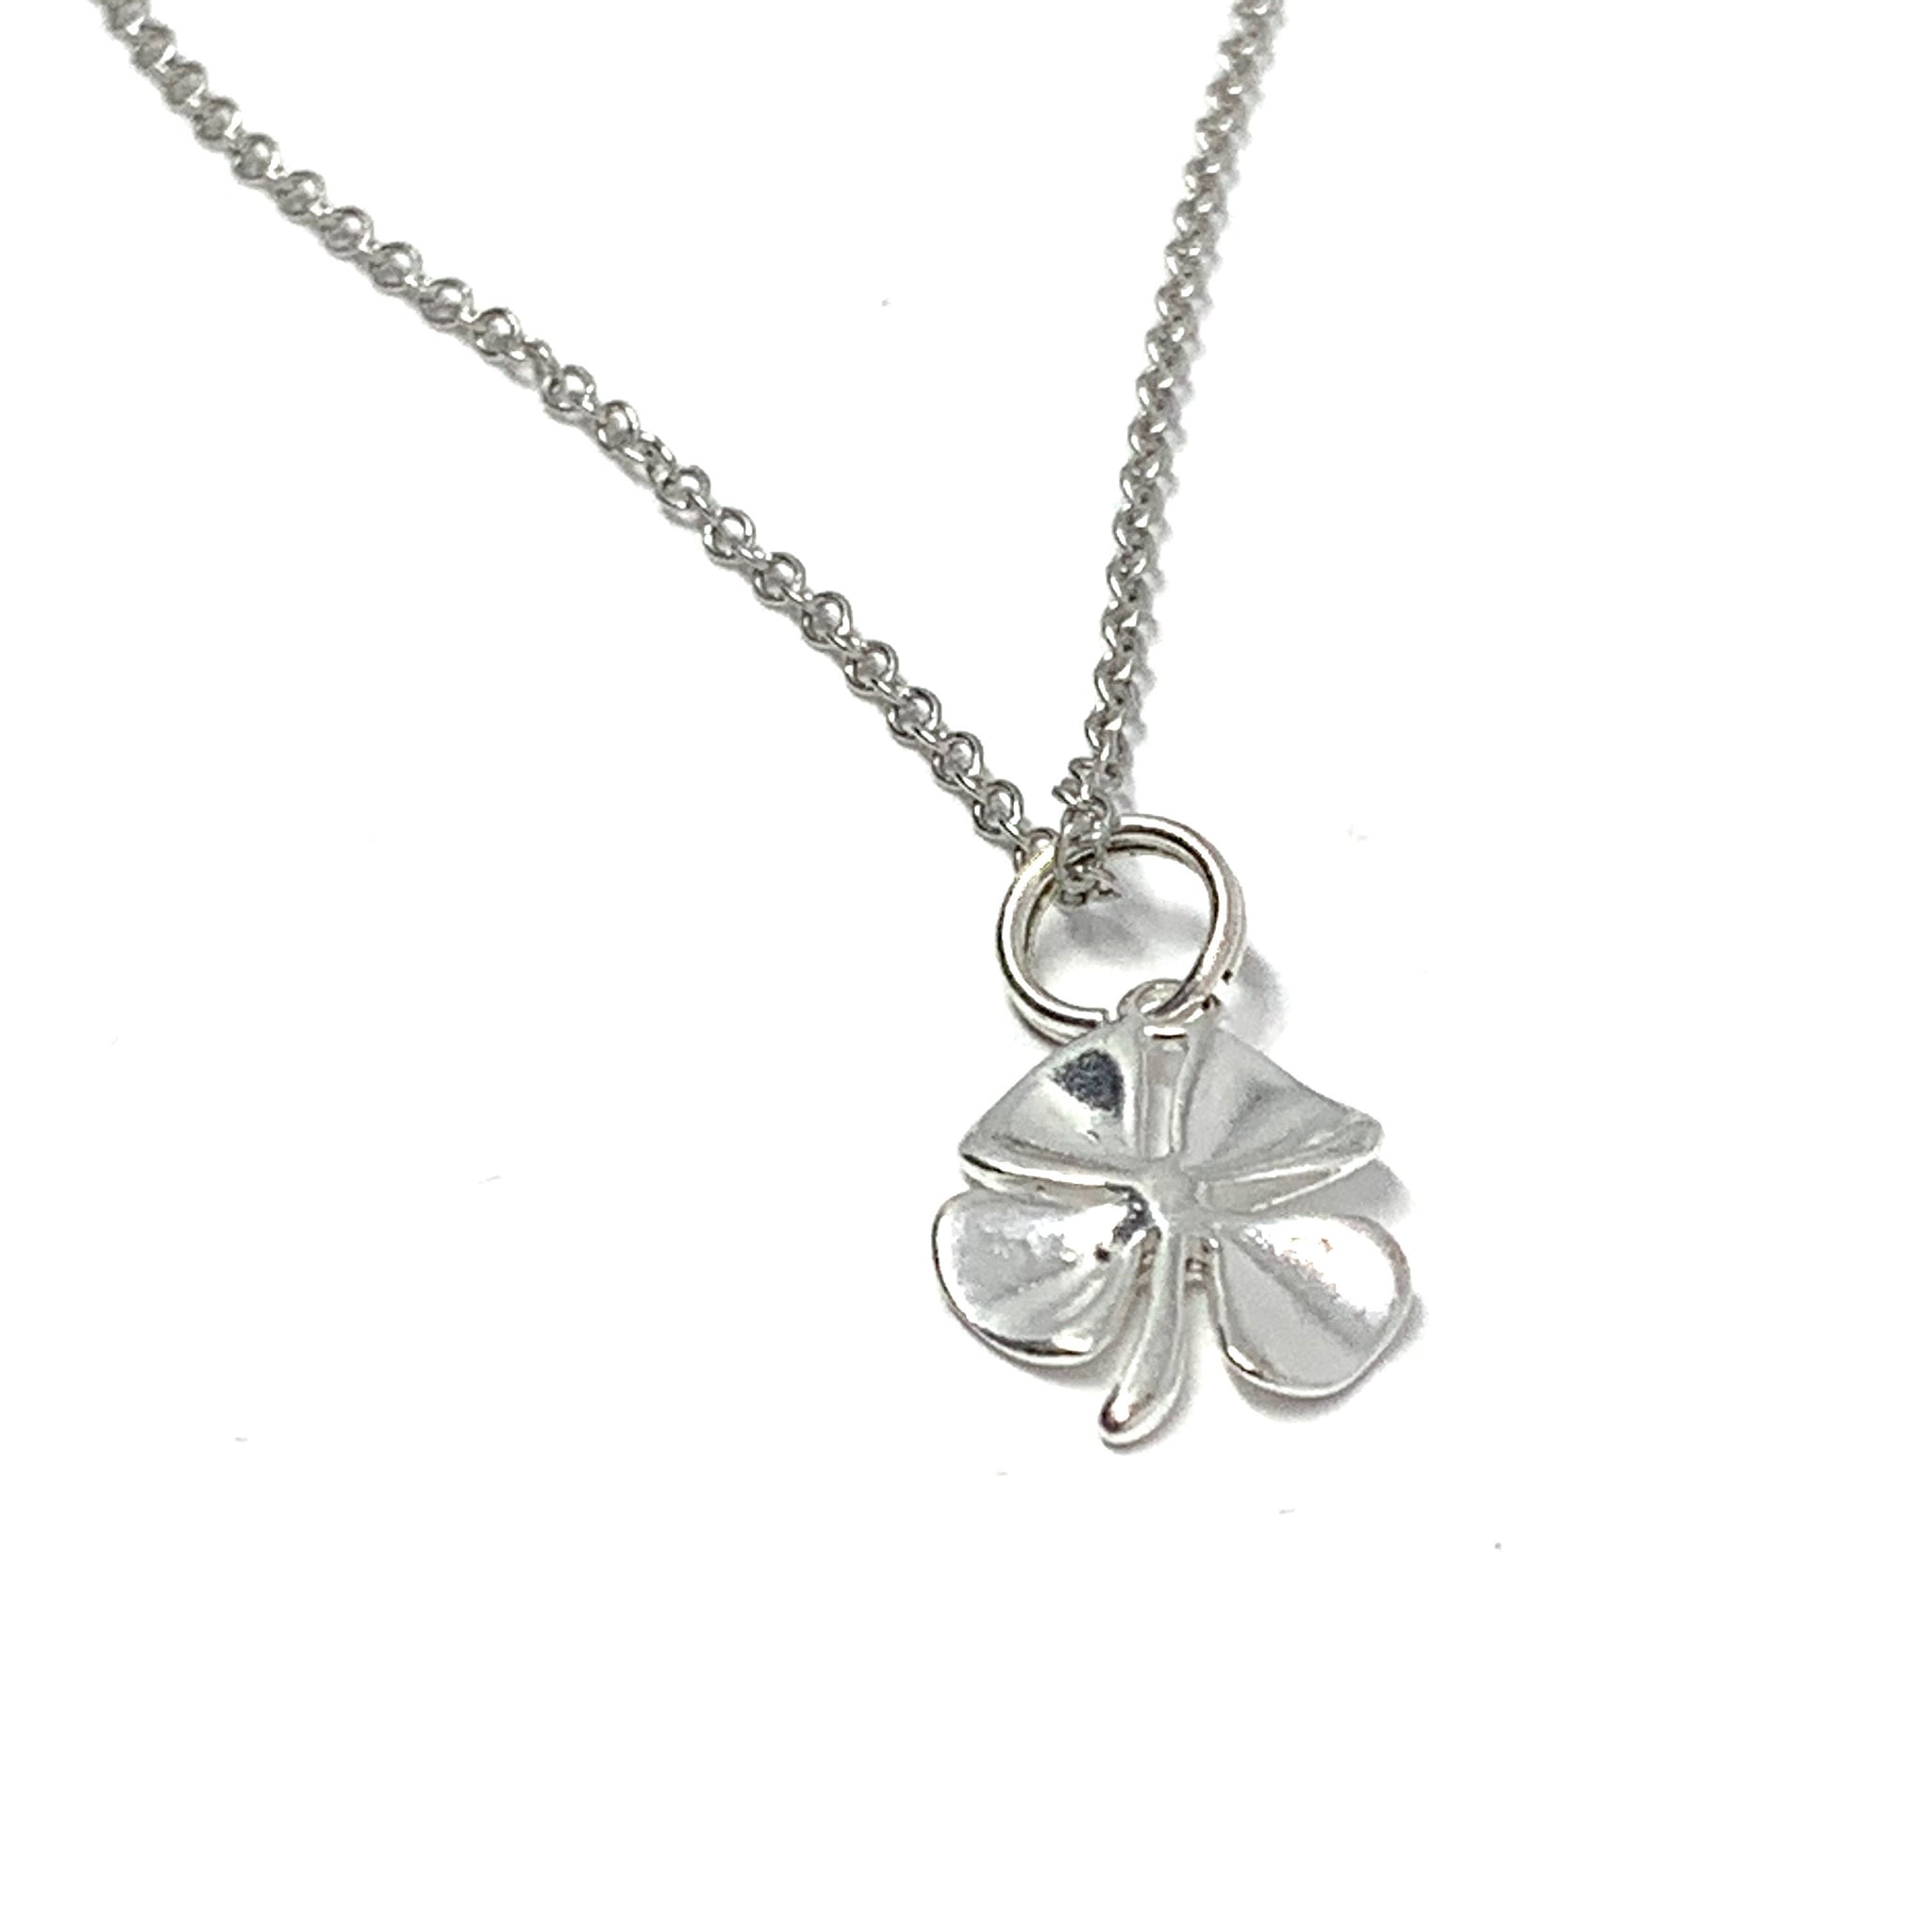 Buy Accessberry Women's Clover Necklace, Beautifully Designed Fashion  Jewelry for Women and Girl (Silver) Free Size at Amazon.in